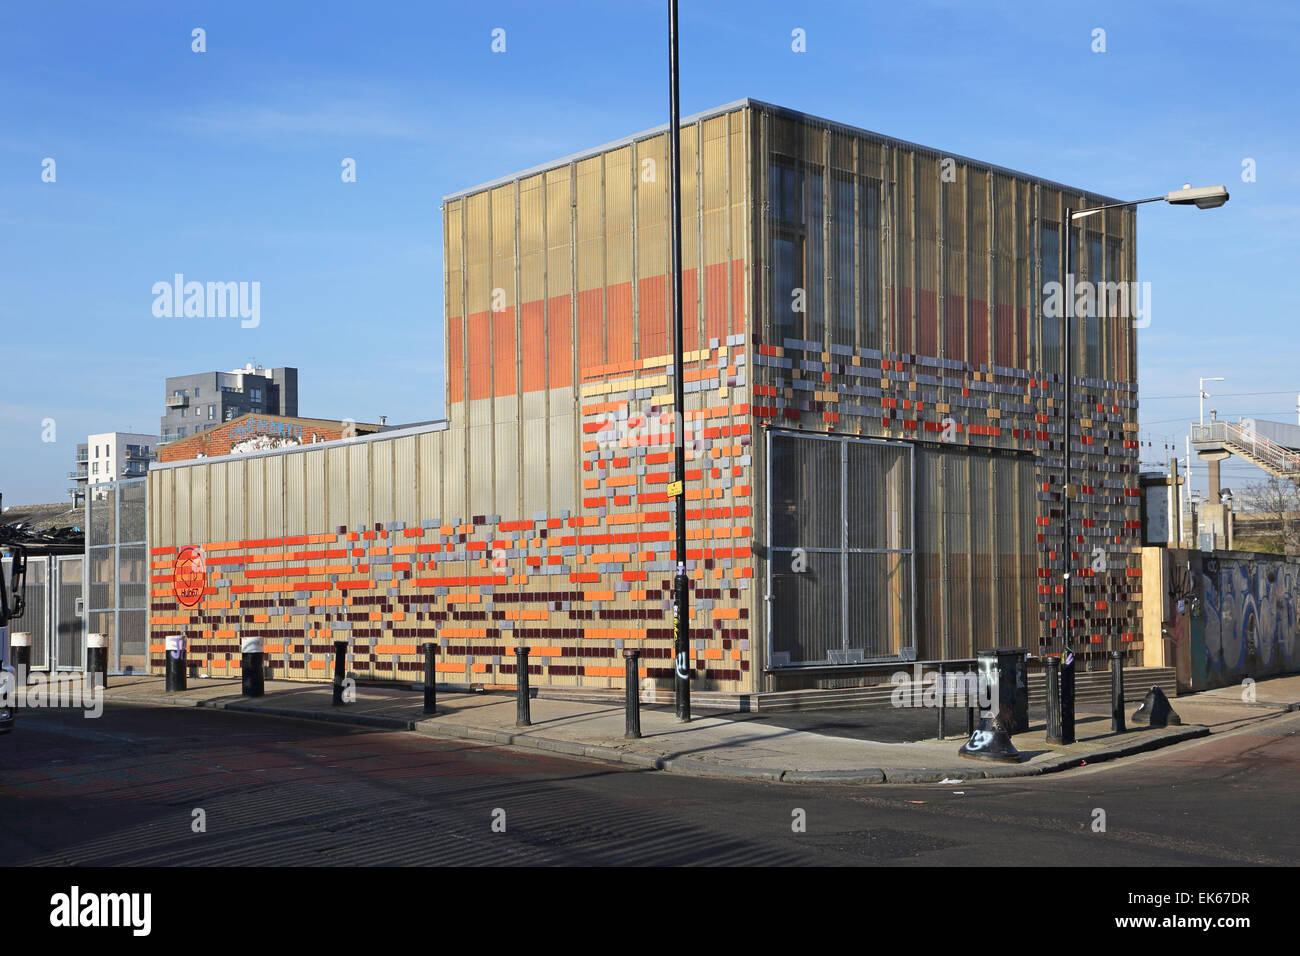 Hub 67, a community space in Hackney wick constructed from recycled materials from th London 2012 Olympic site Stock Photo